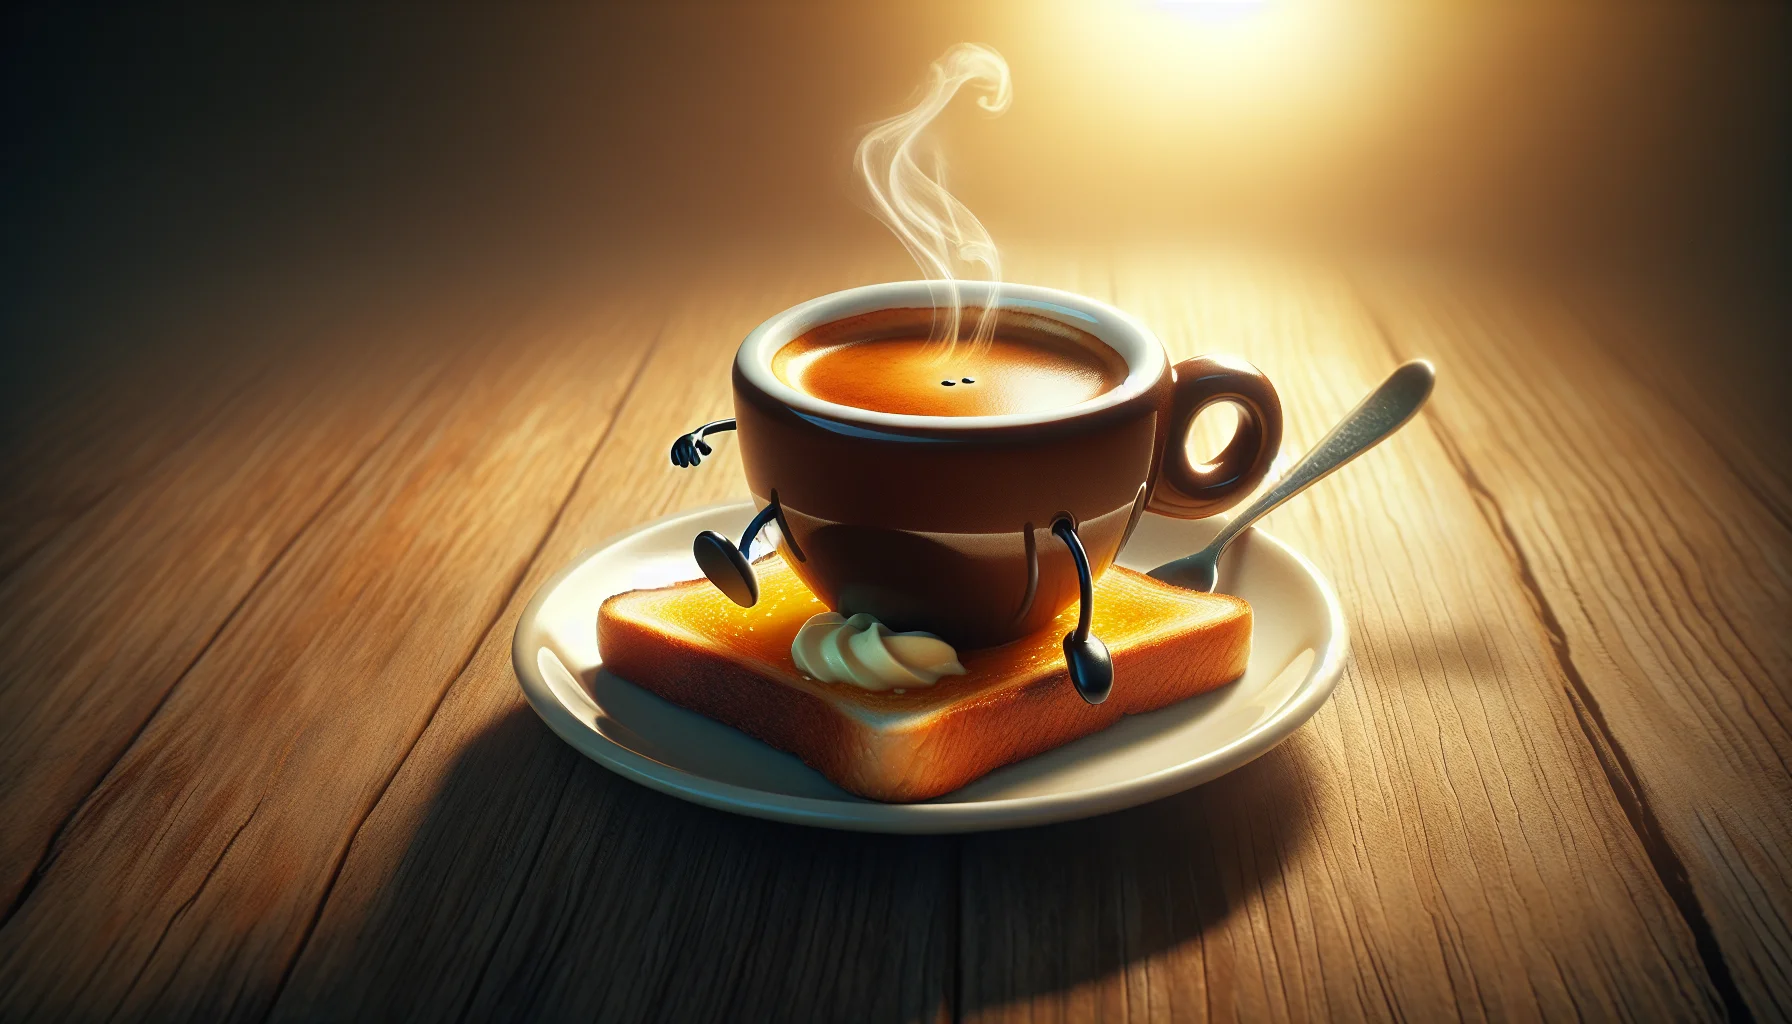 Create a humorous and enticing scene featuring a steaming cup of espresso sitting on a small saucer. It's deep, rich brown color hints at its strong flavor. A tiny spoon rests on the saucer next to the cup. The cup has legs and arms, with which it is trying to jump off a sliding buttered toast. The toast is humorously bewildered by the coffee cup's adventurous spirit. The background consists of a wooden table and a warm sunrise, flooding the scene with a subtle golden light. This surreal scene embodies the joy and energy people derive from their morning espresso.